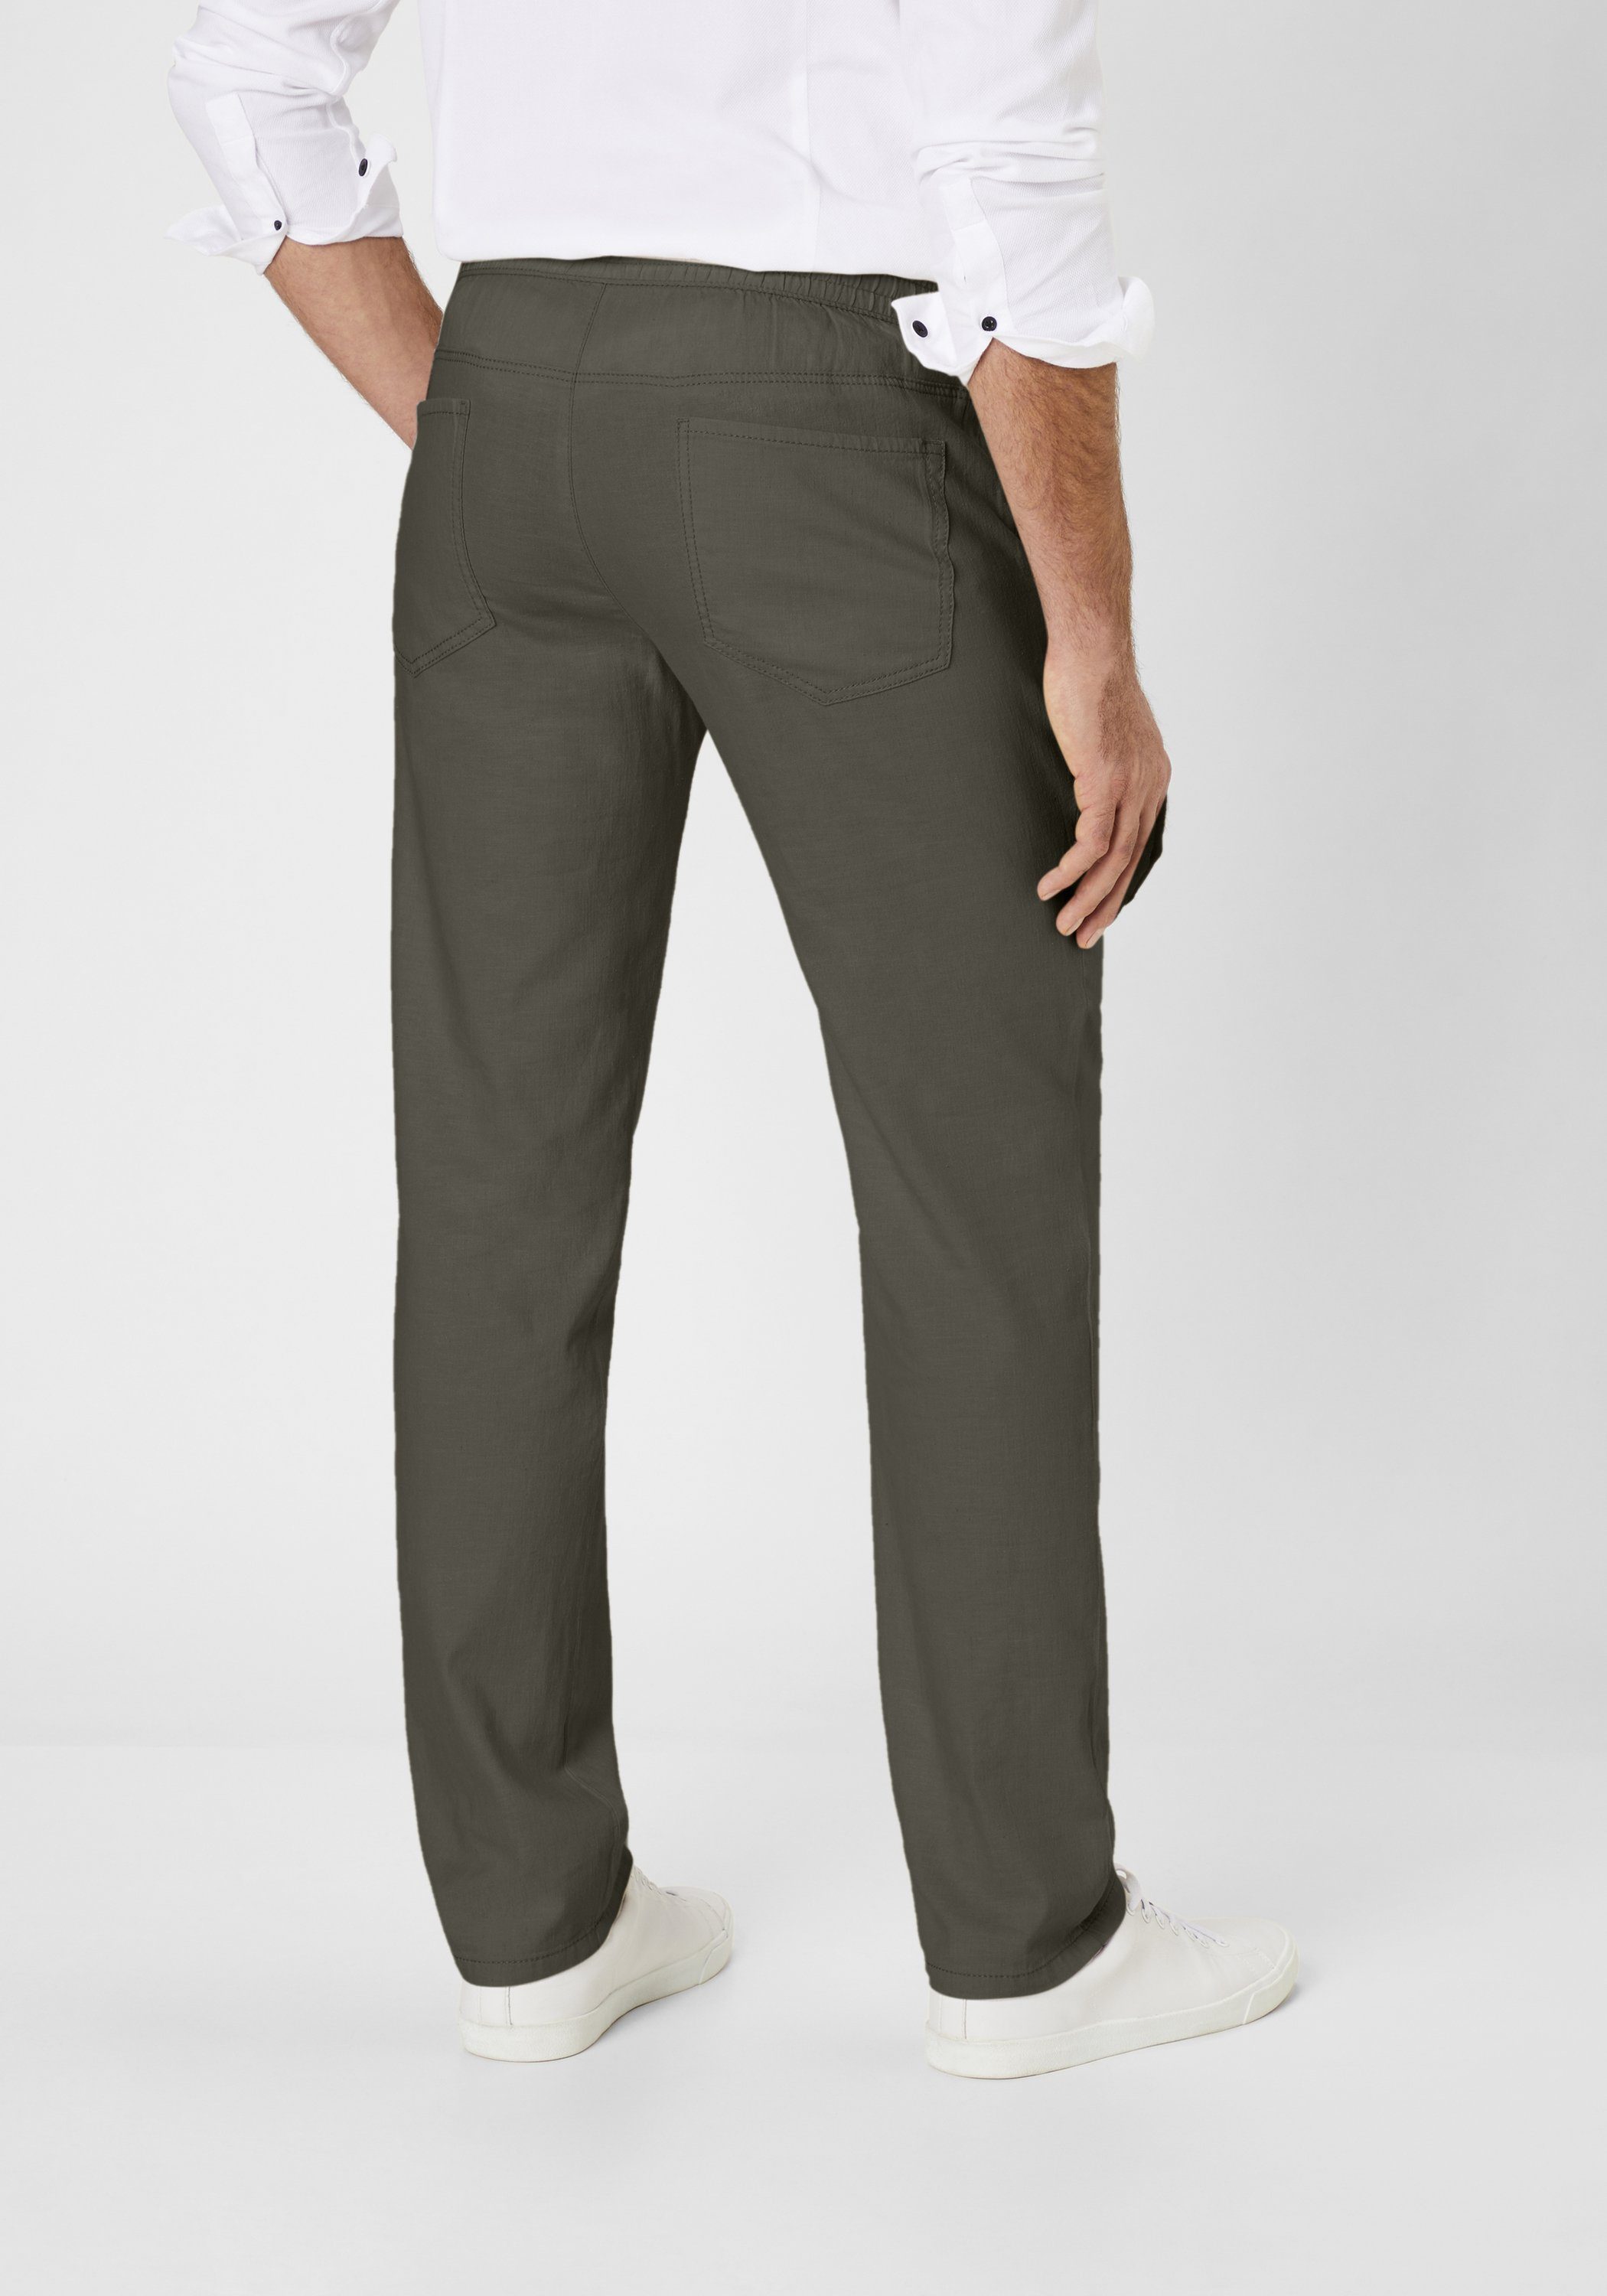 Redpoint Chinohose Stretch-Chinohose Carden Sehr leichte oliv